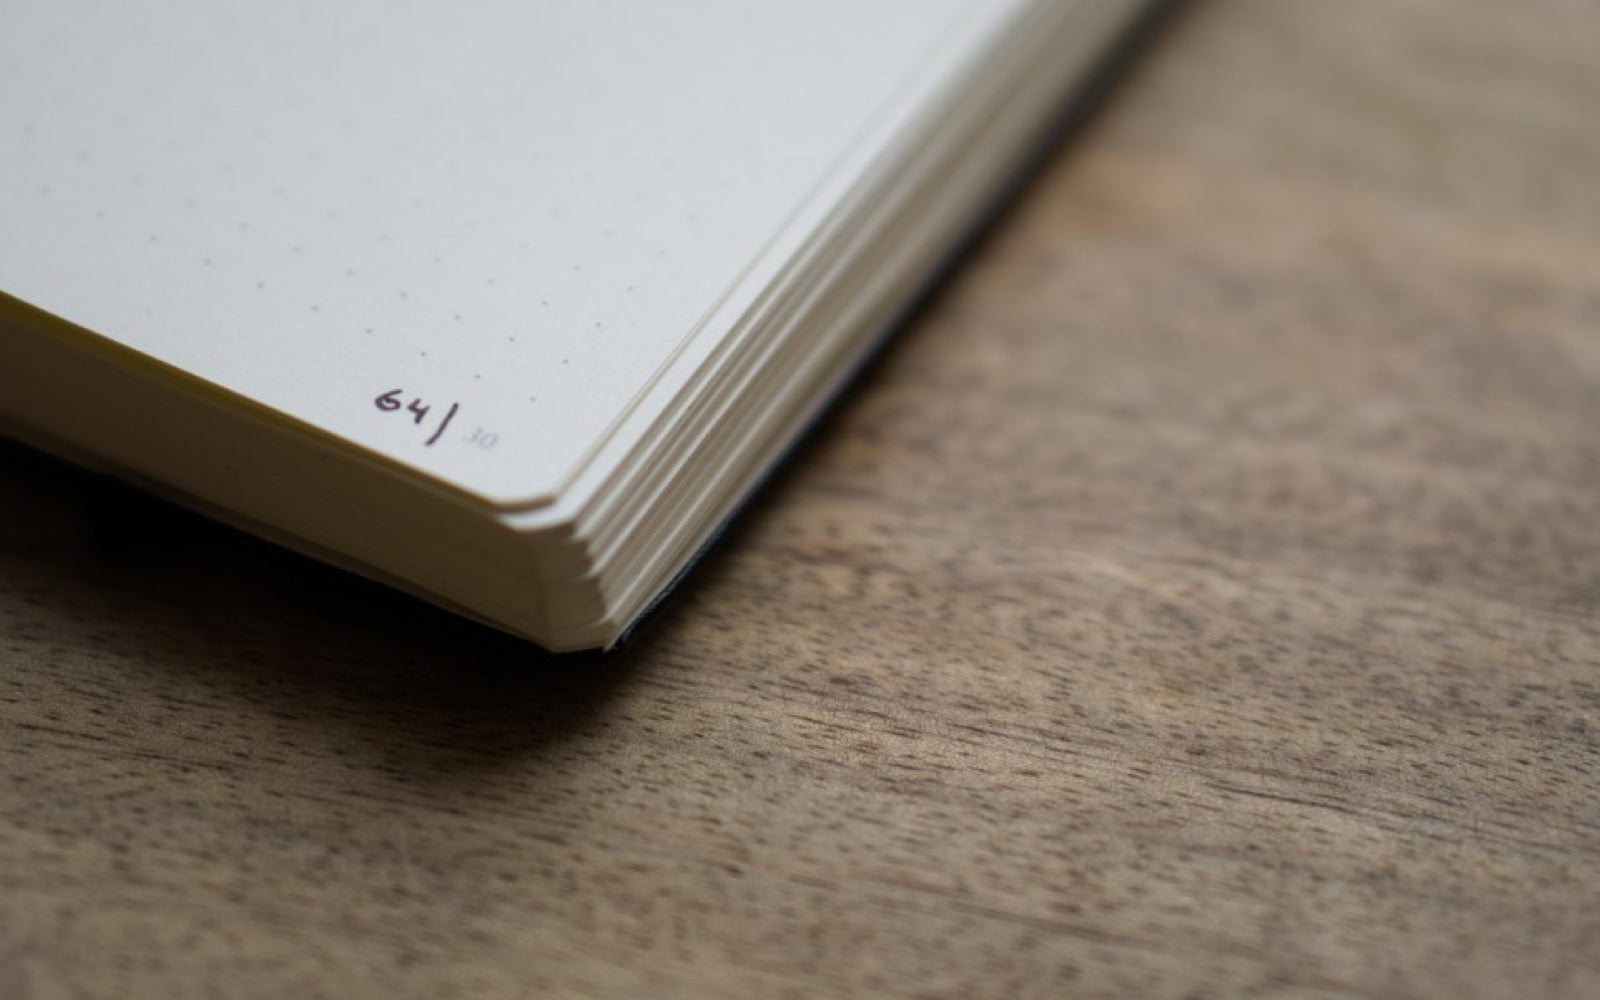 Improve Your Focus and Concentrate Better With This Bullet Journaling